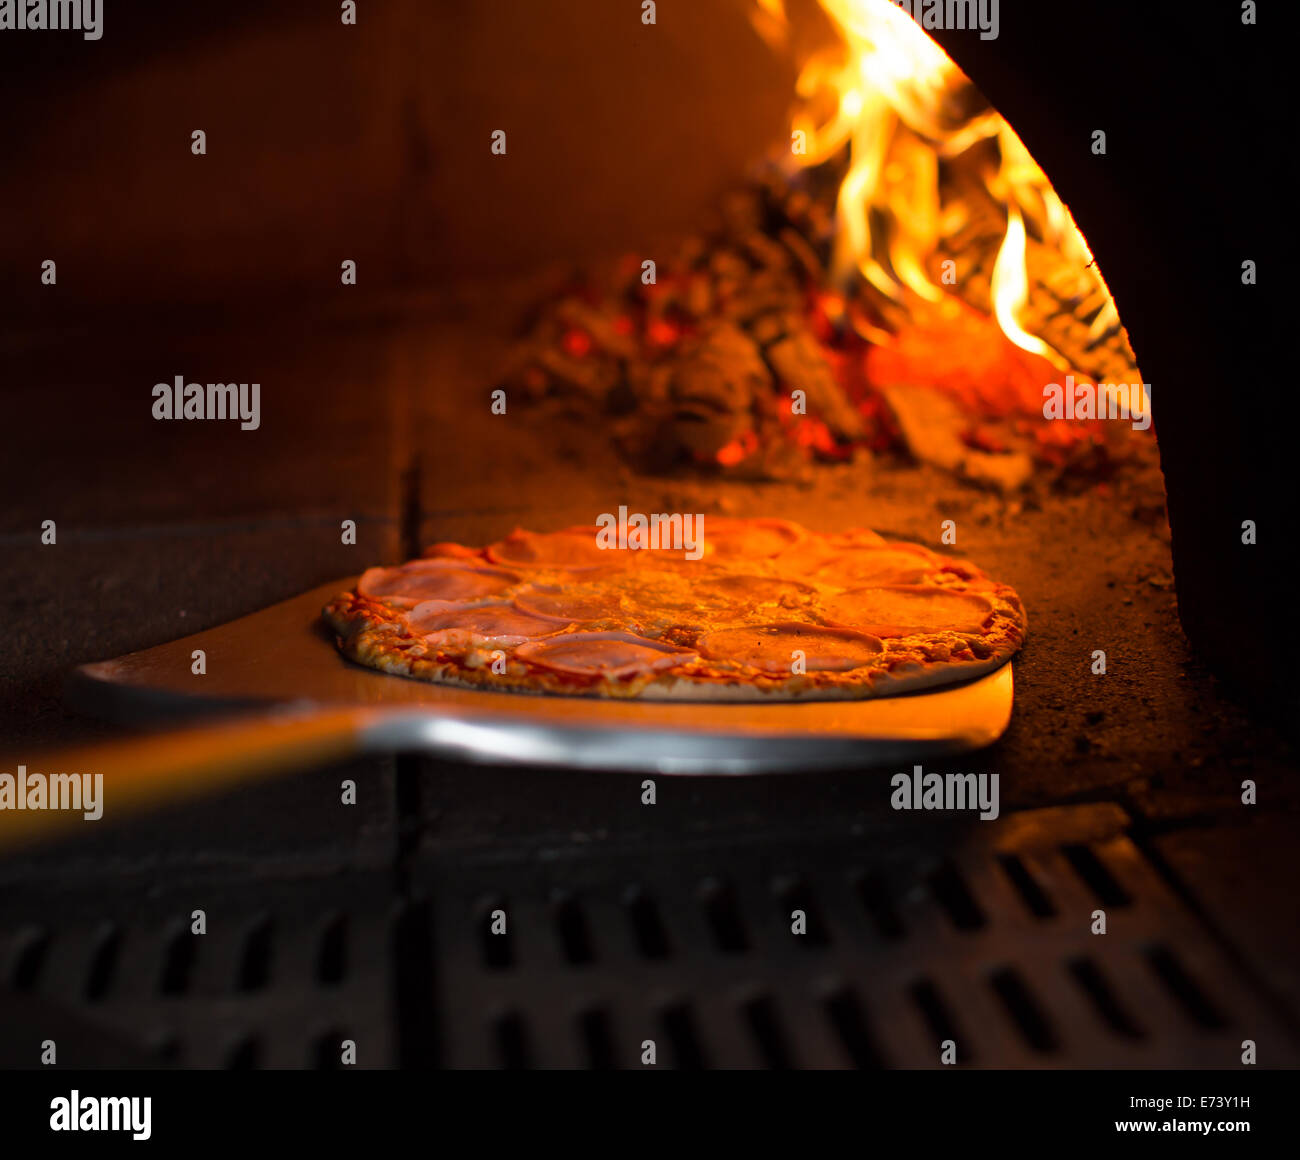 Ready pizza getting from oven Stock Photo